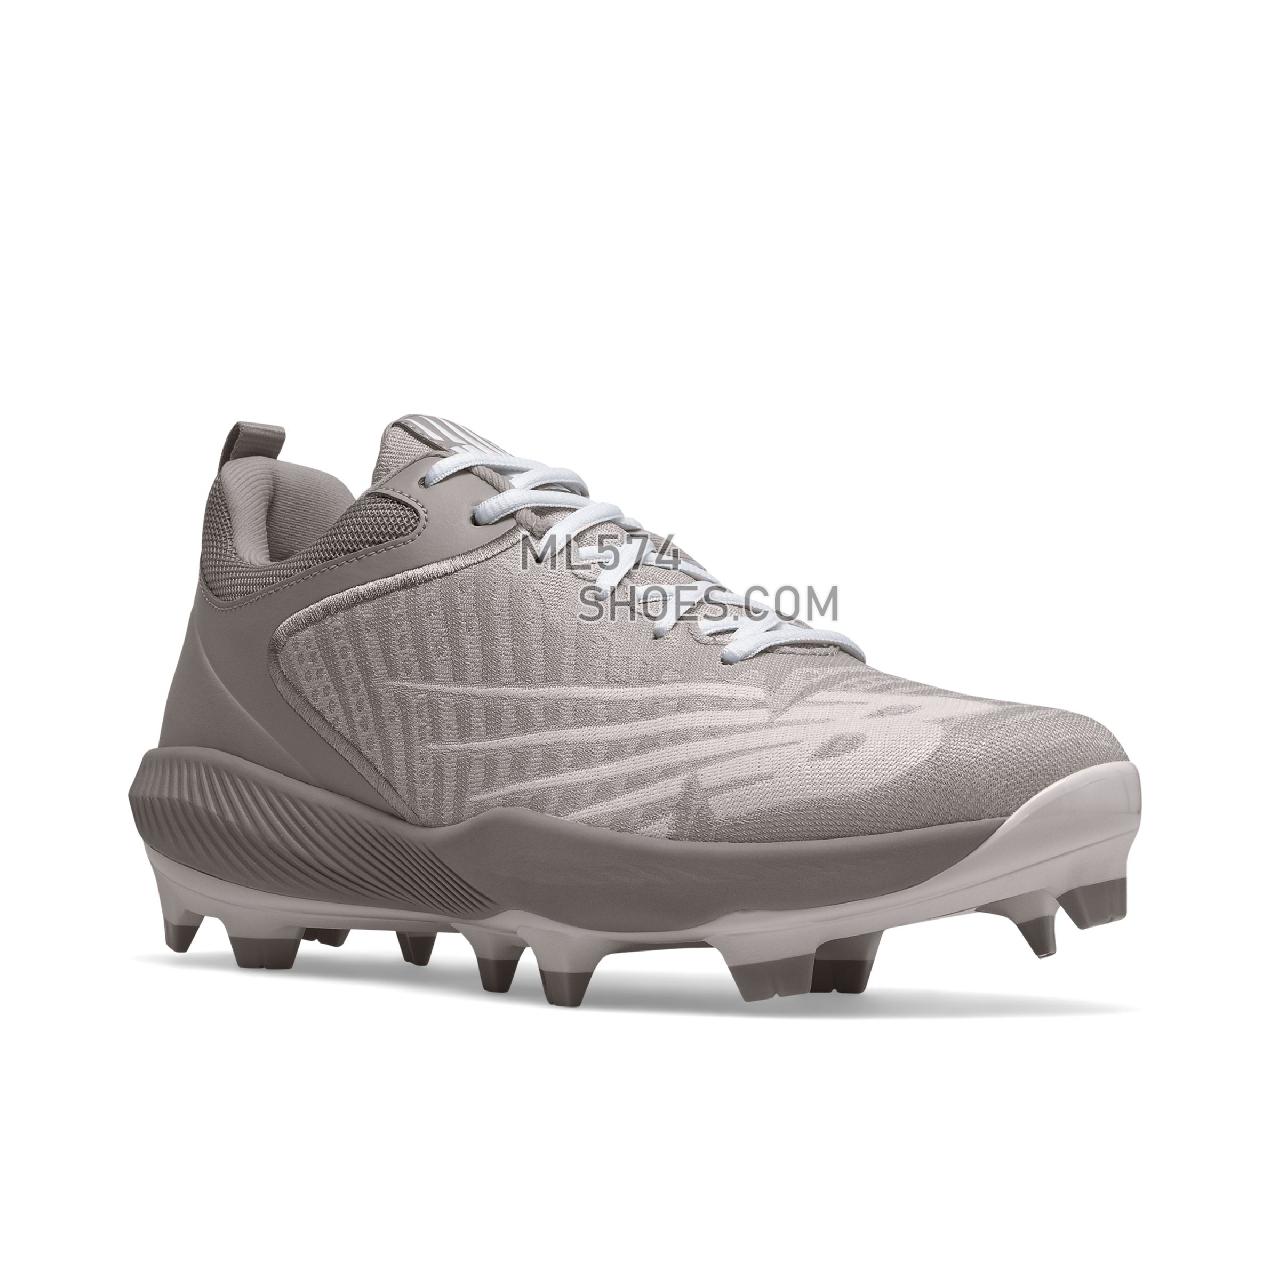 New Balance FuelCell 4040 v6 Molded - Men's Mid-Cut Baseball Cleats - Grey with White - PL4040G6